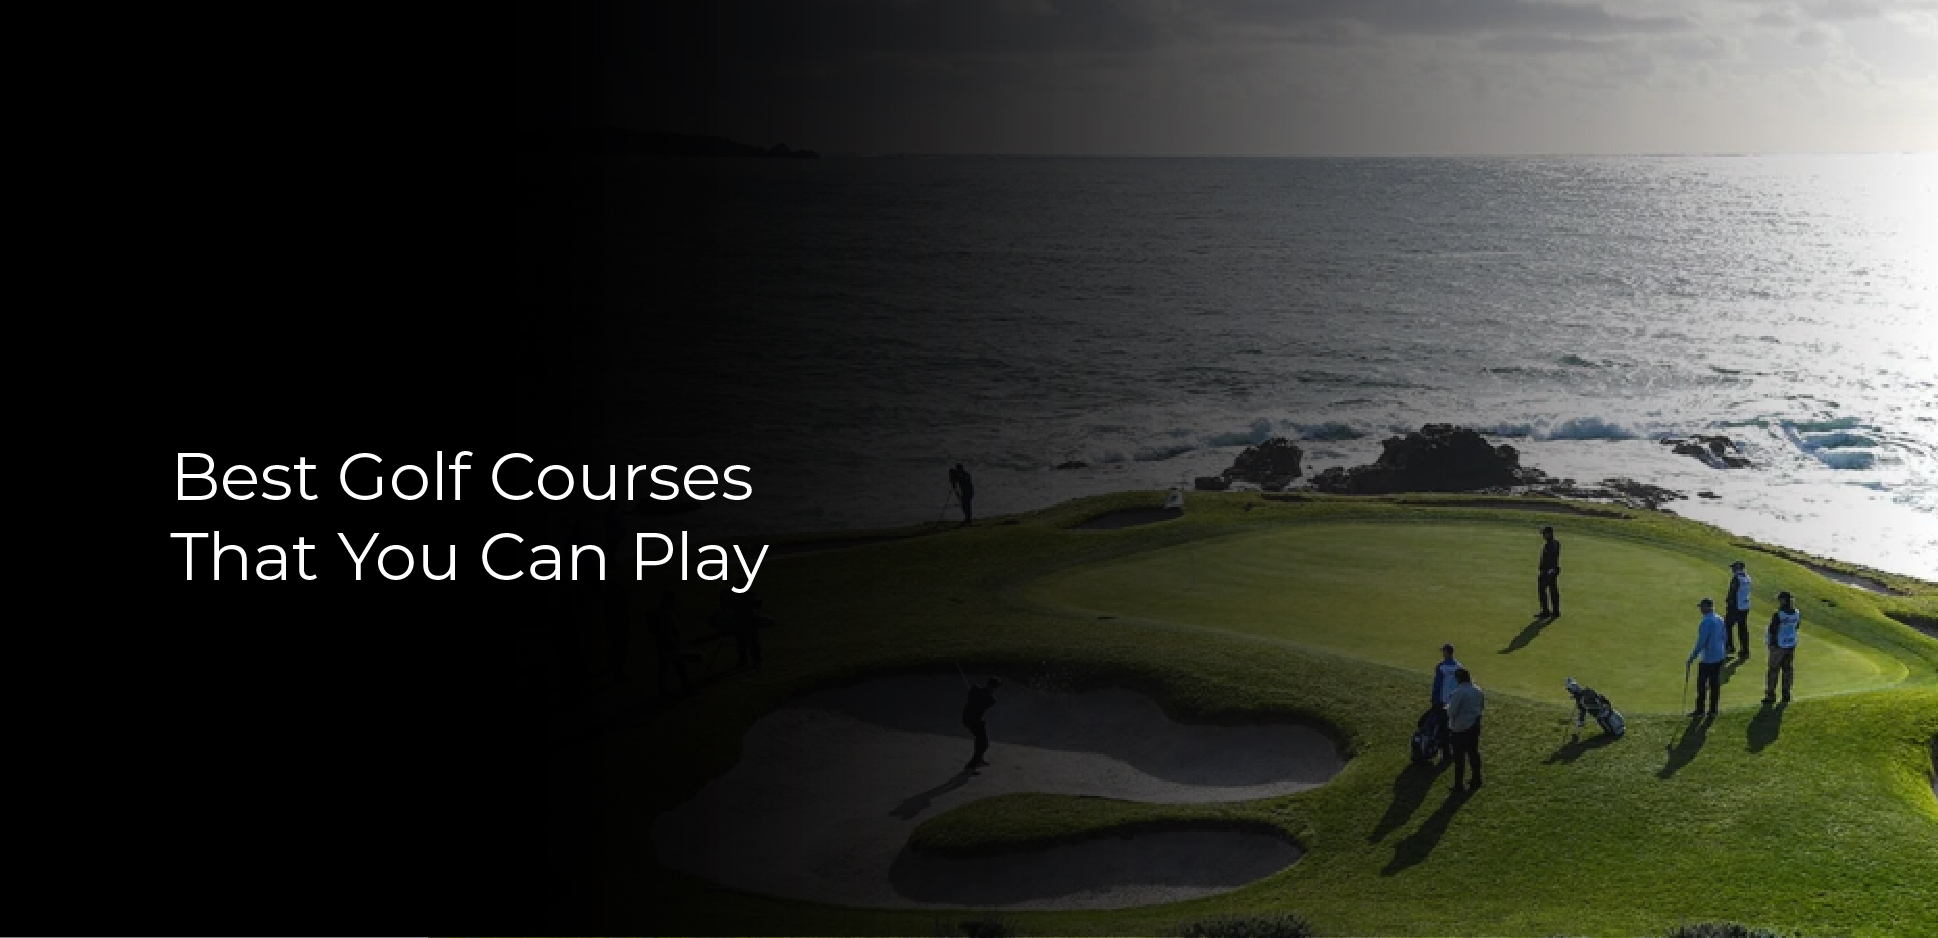 Best Golf Courses That You Can Play